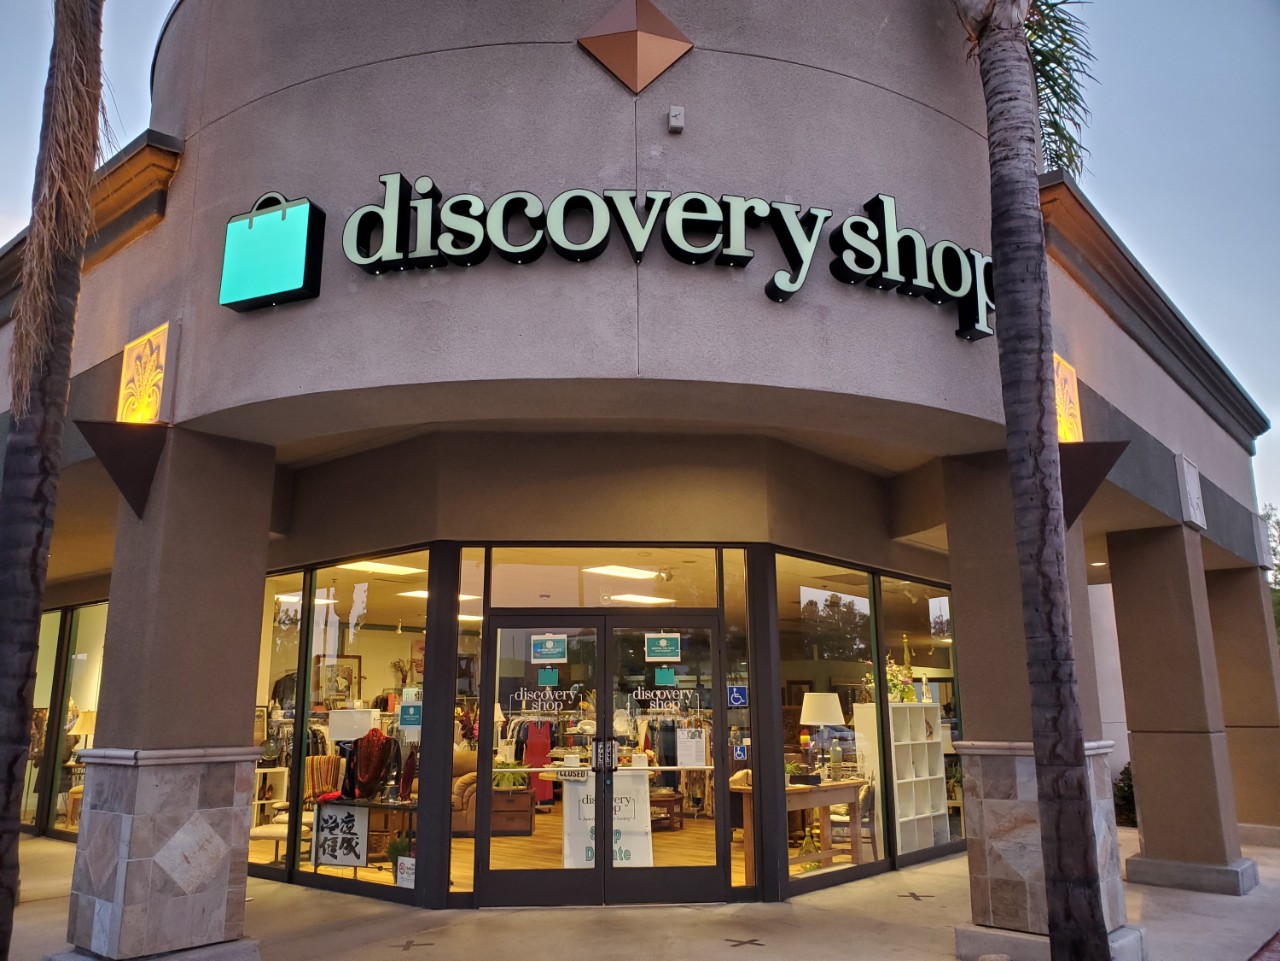 Discovery Shop, Front doors and sign of the Temecula Discovery Shop